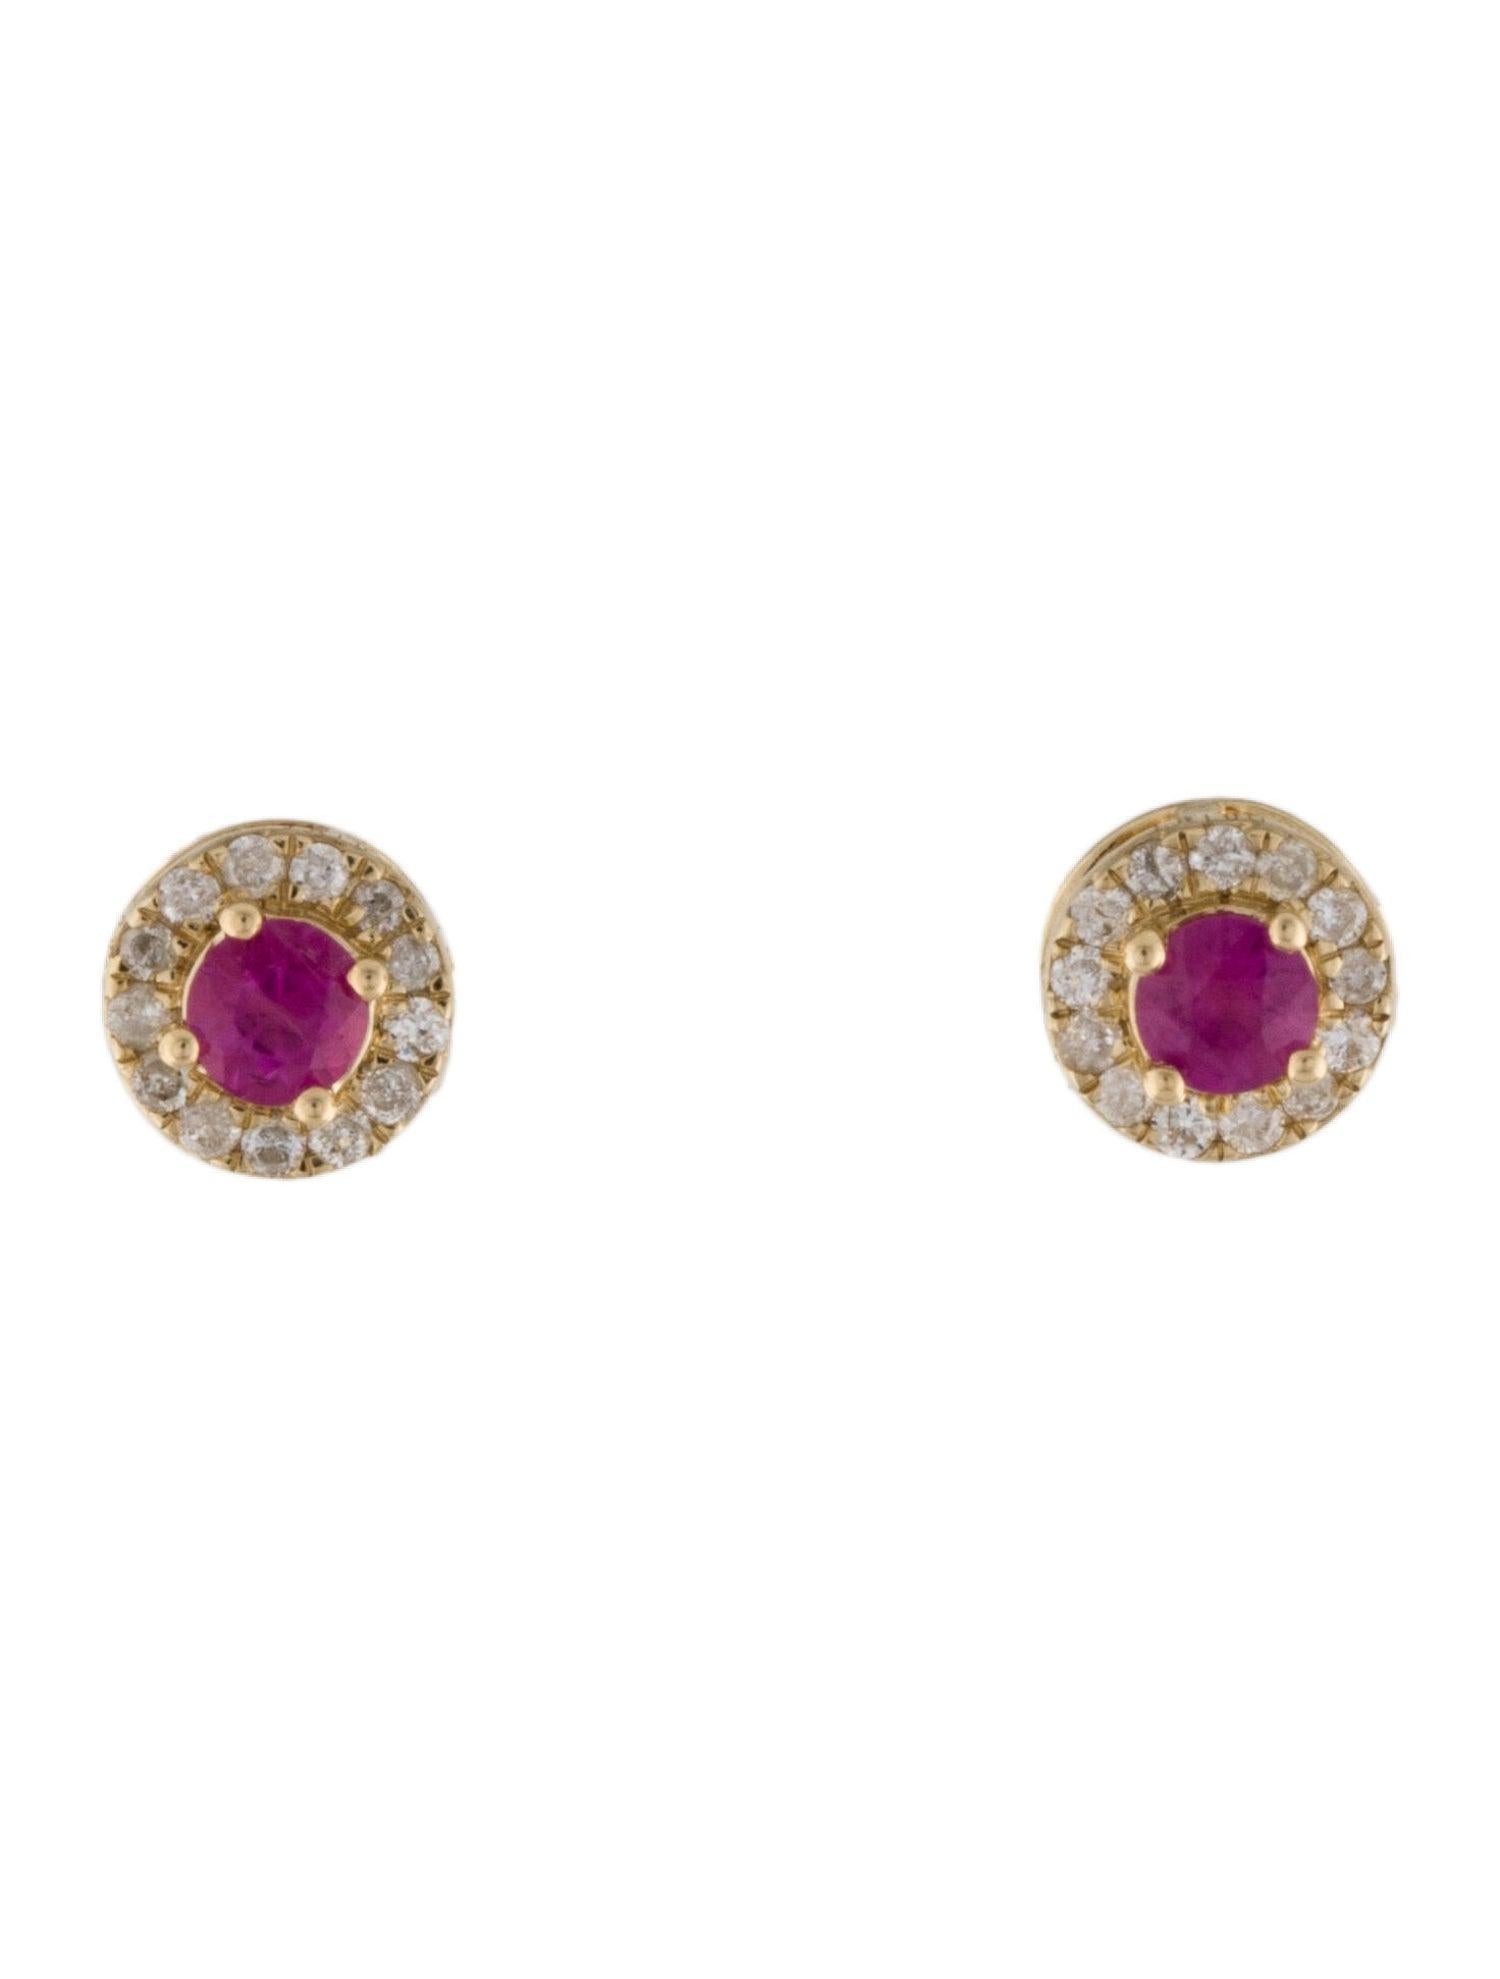 Exquisite 14K Ruby & Diamond Studs - Elegant & Timeless Gemstone Earrings In New Condition For Sale In Holtsville, NY